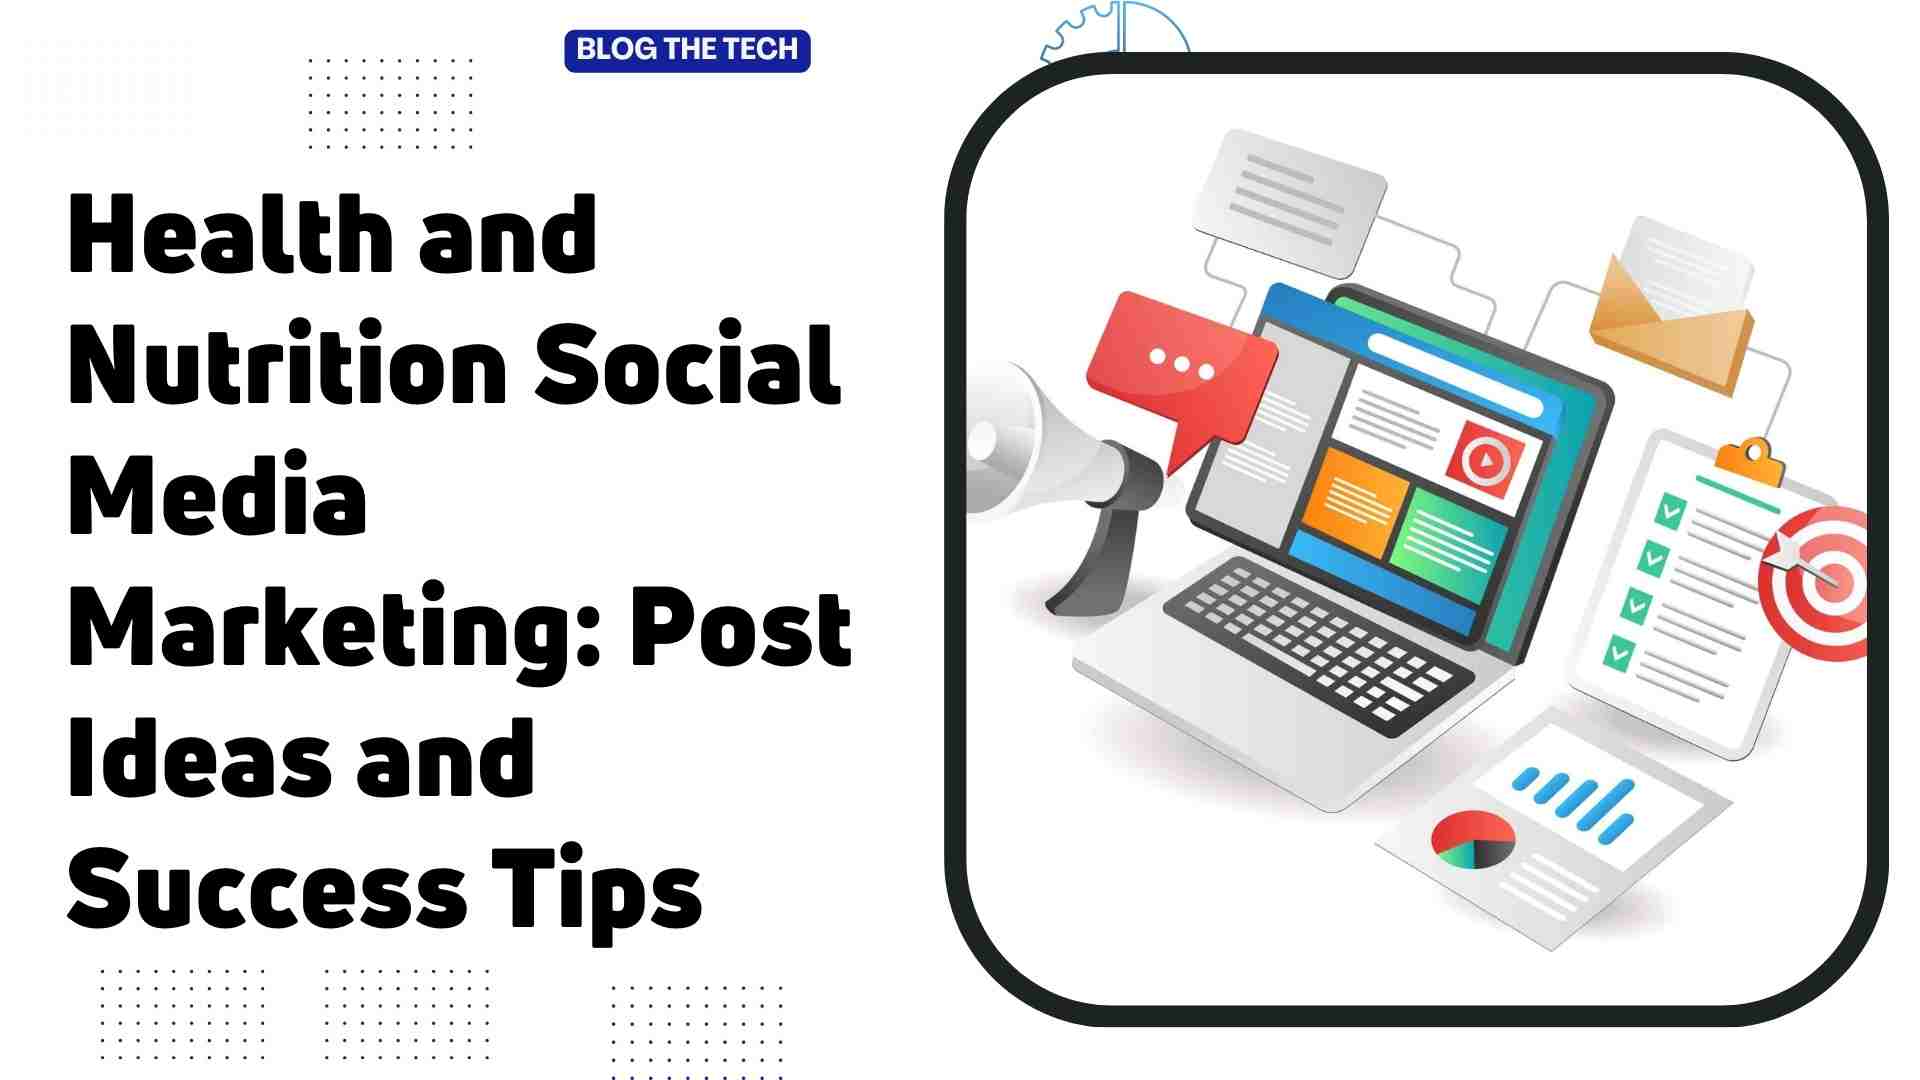 Health and Nutrition Social Media Marketing: Post Ideas and Success Tips